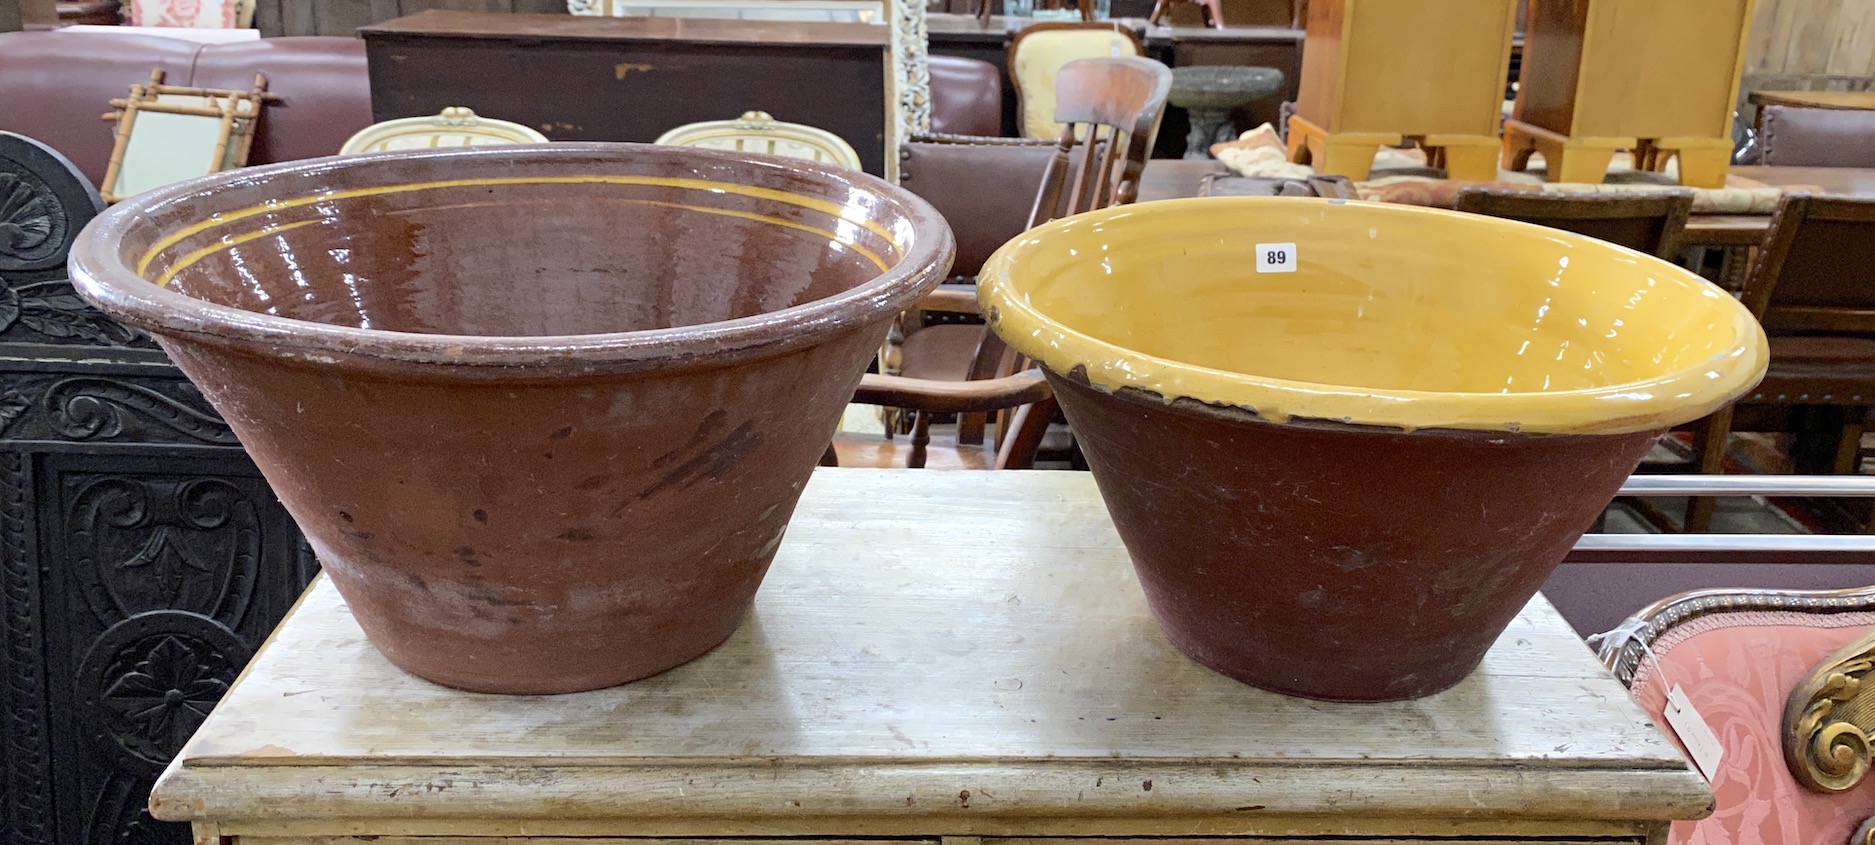 Two Victorian glazed earthenware circular dairy bowls, larger diameter 50cm, height 27cm